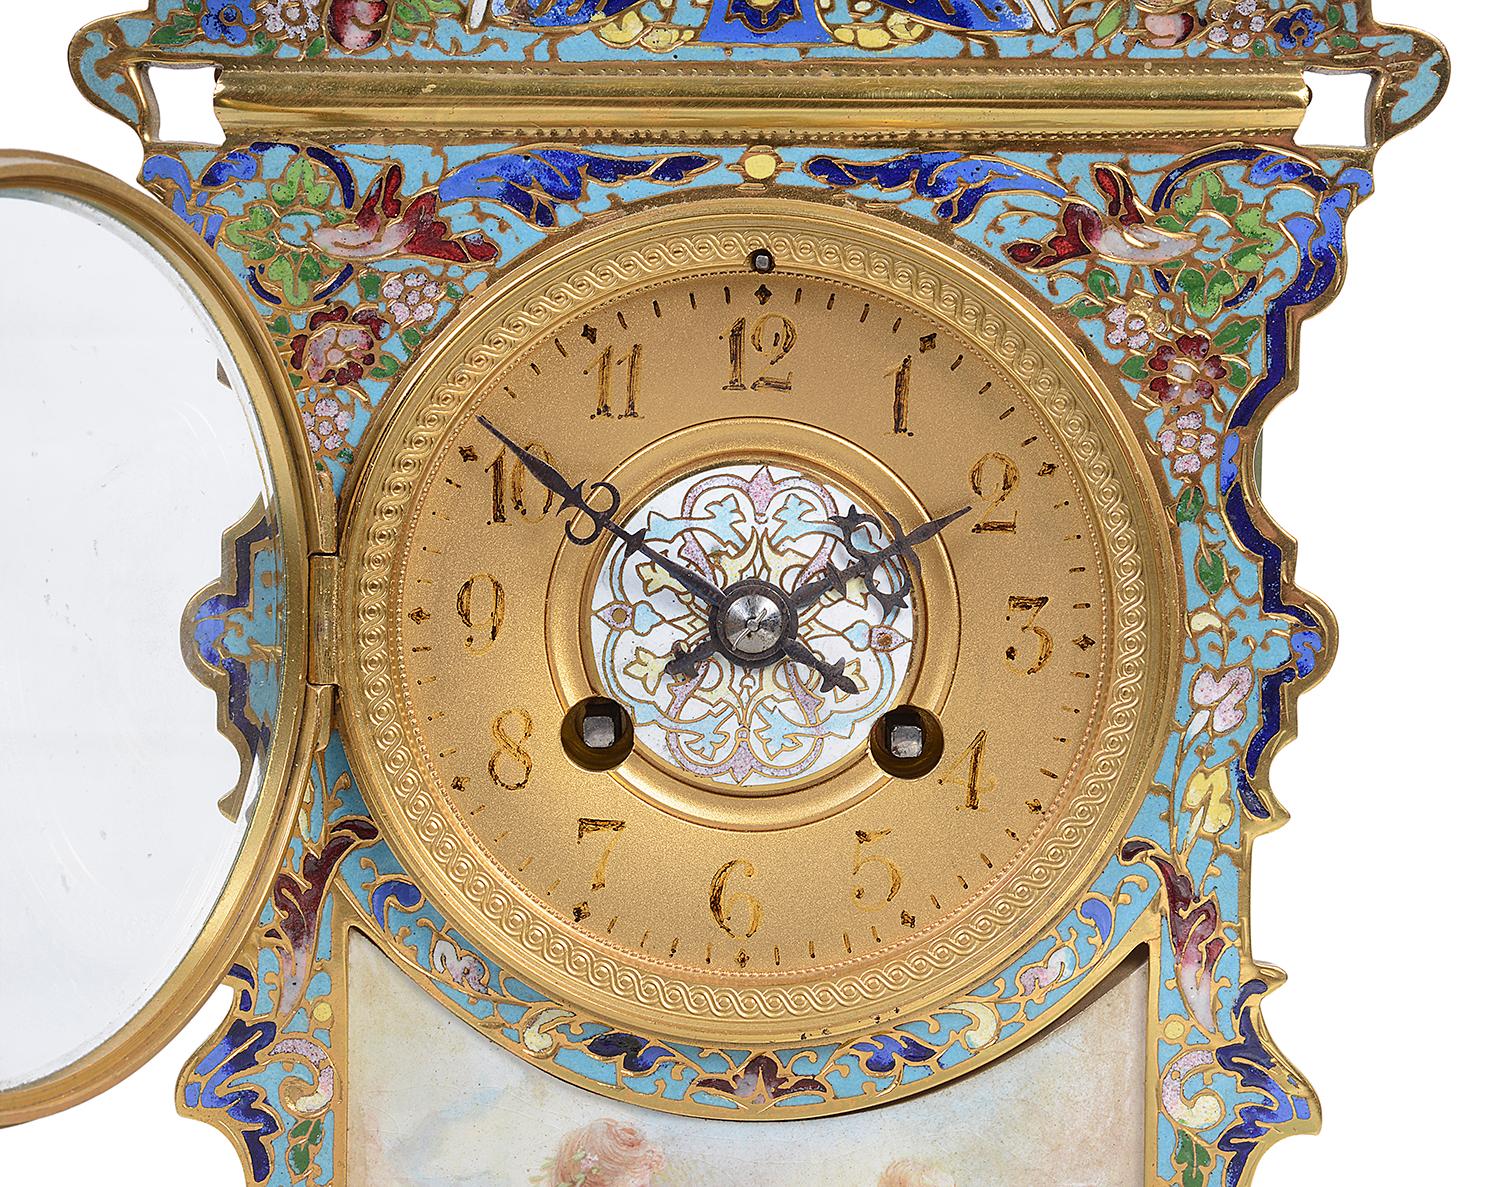 A very good quality late 19th century French Champleve enamel mantel clock, the clock has an eight day duration movement that chimes on the hour and half hour. The enamel having wonderful bold colored scrolling foliate decoration, surrounding an